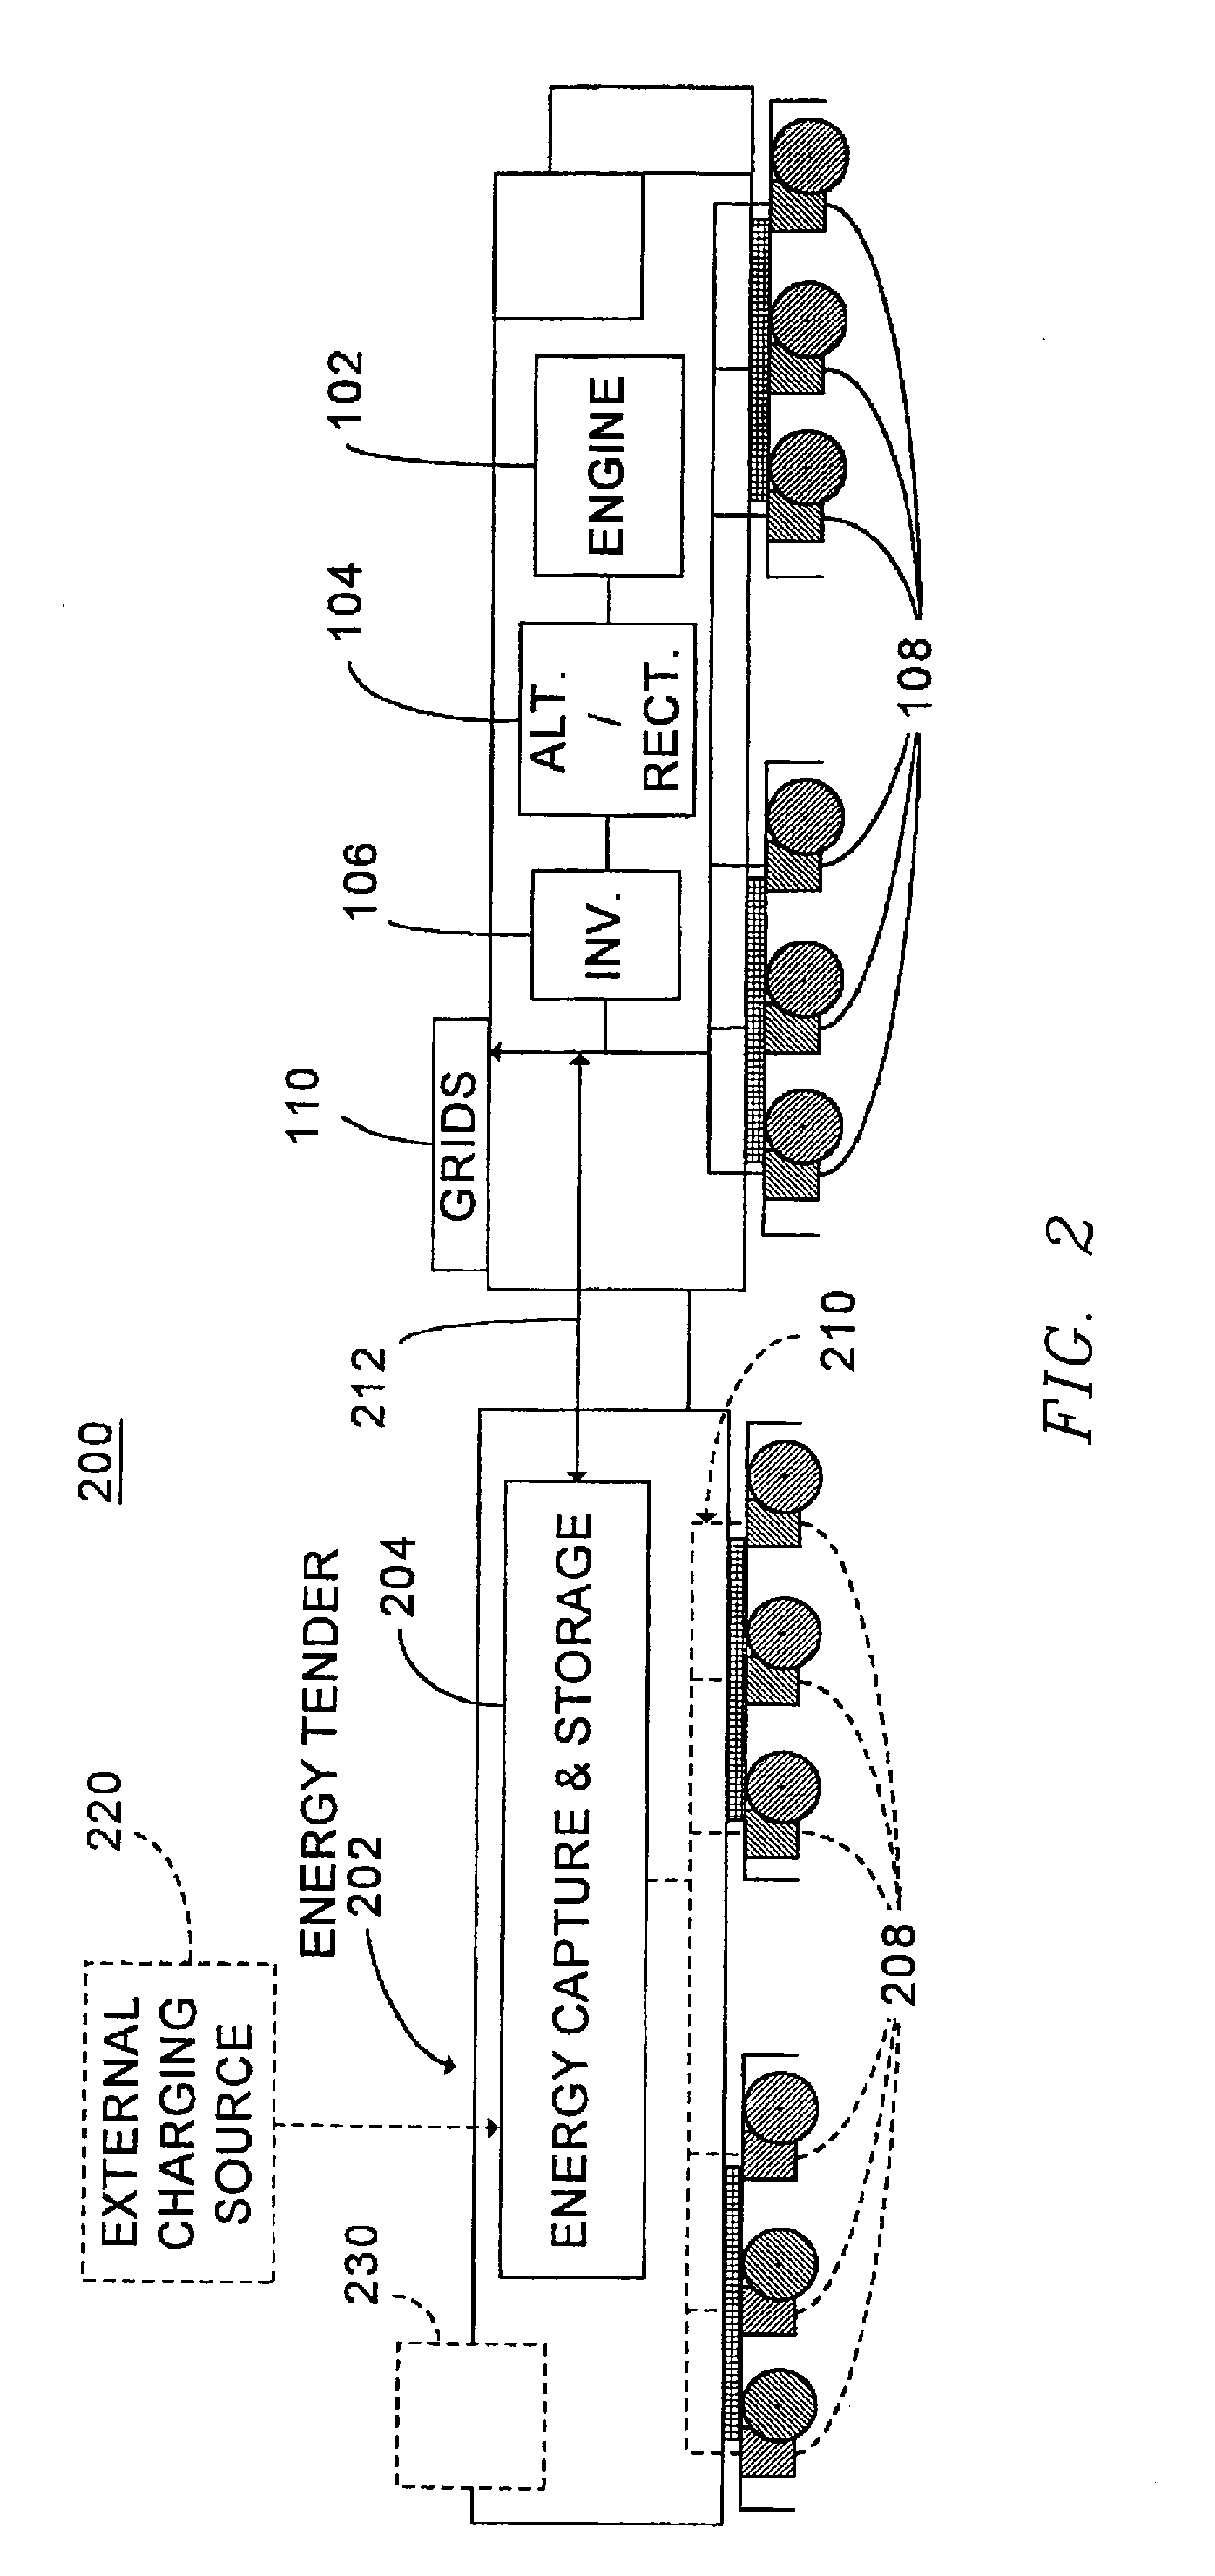 System and Method For Monitoring The Effectiveness Of A Brake Function In A Powered System